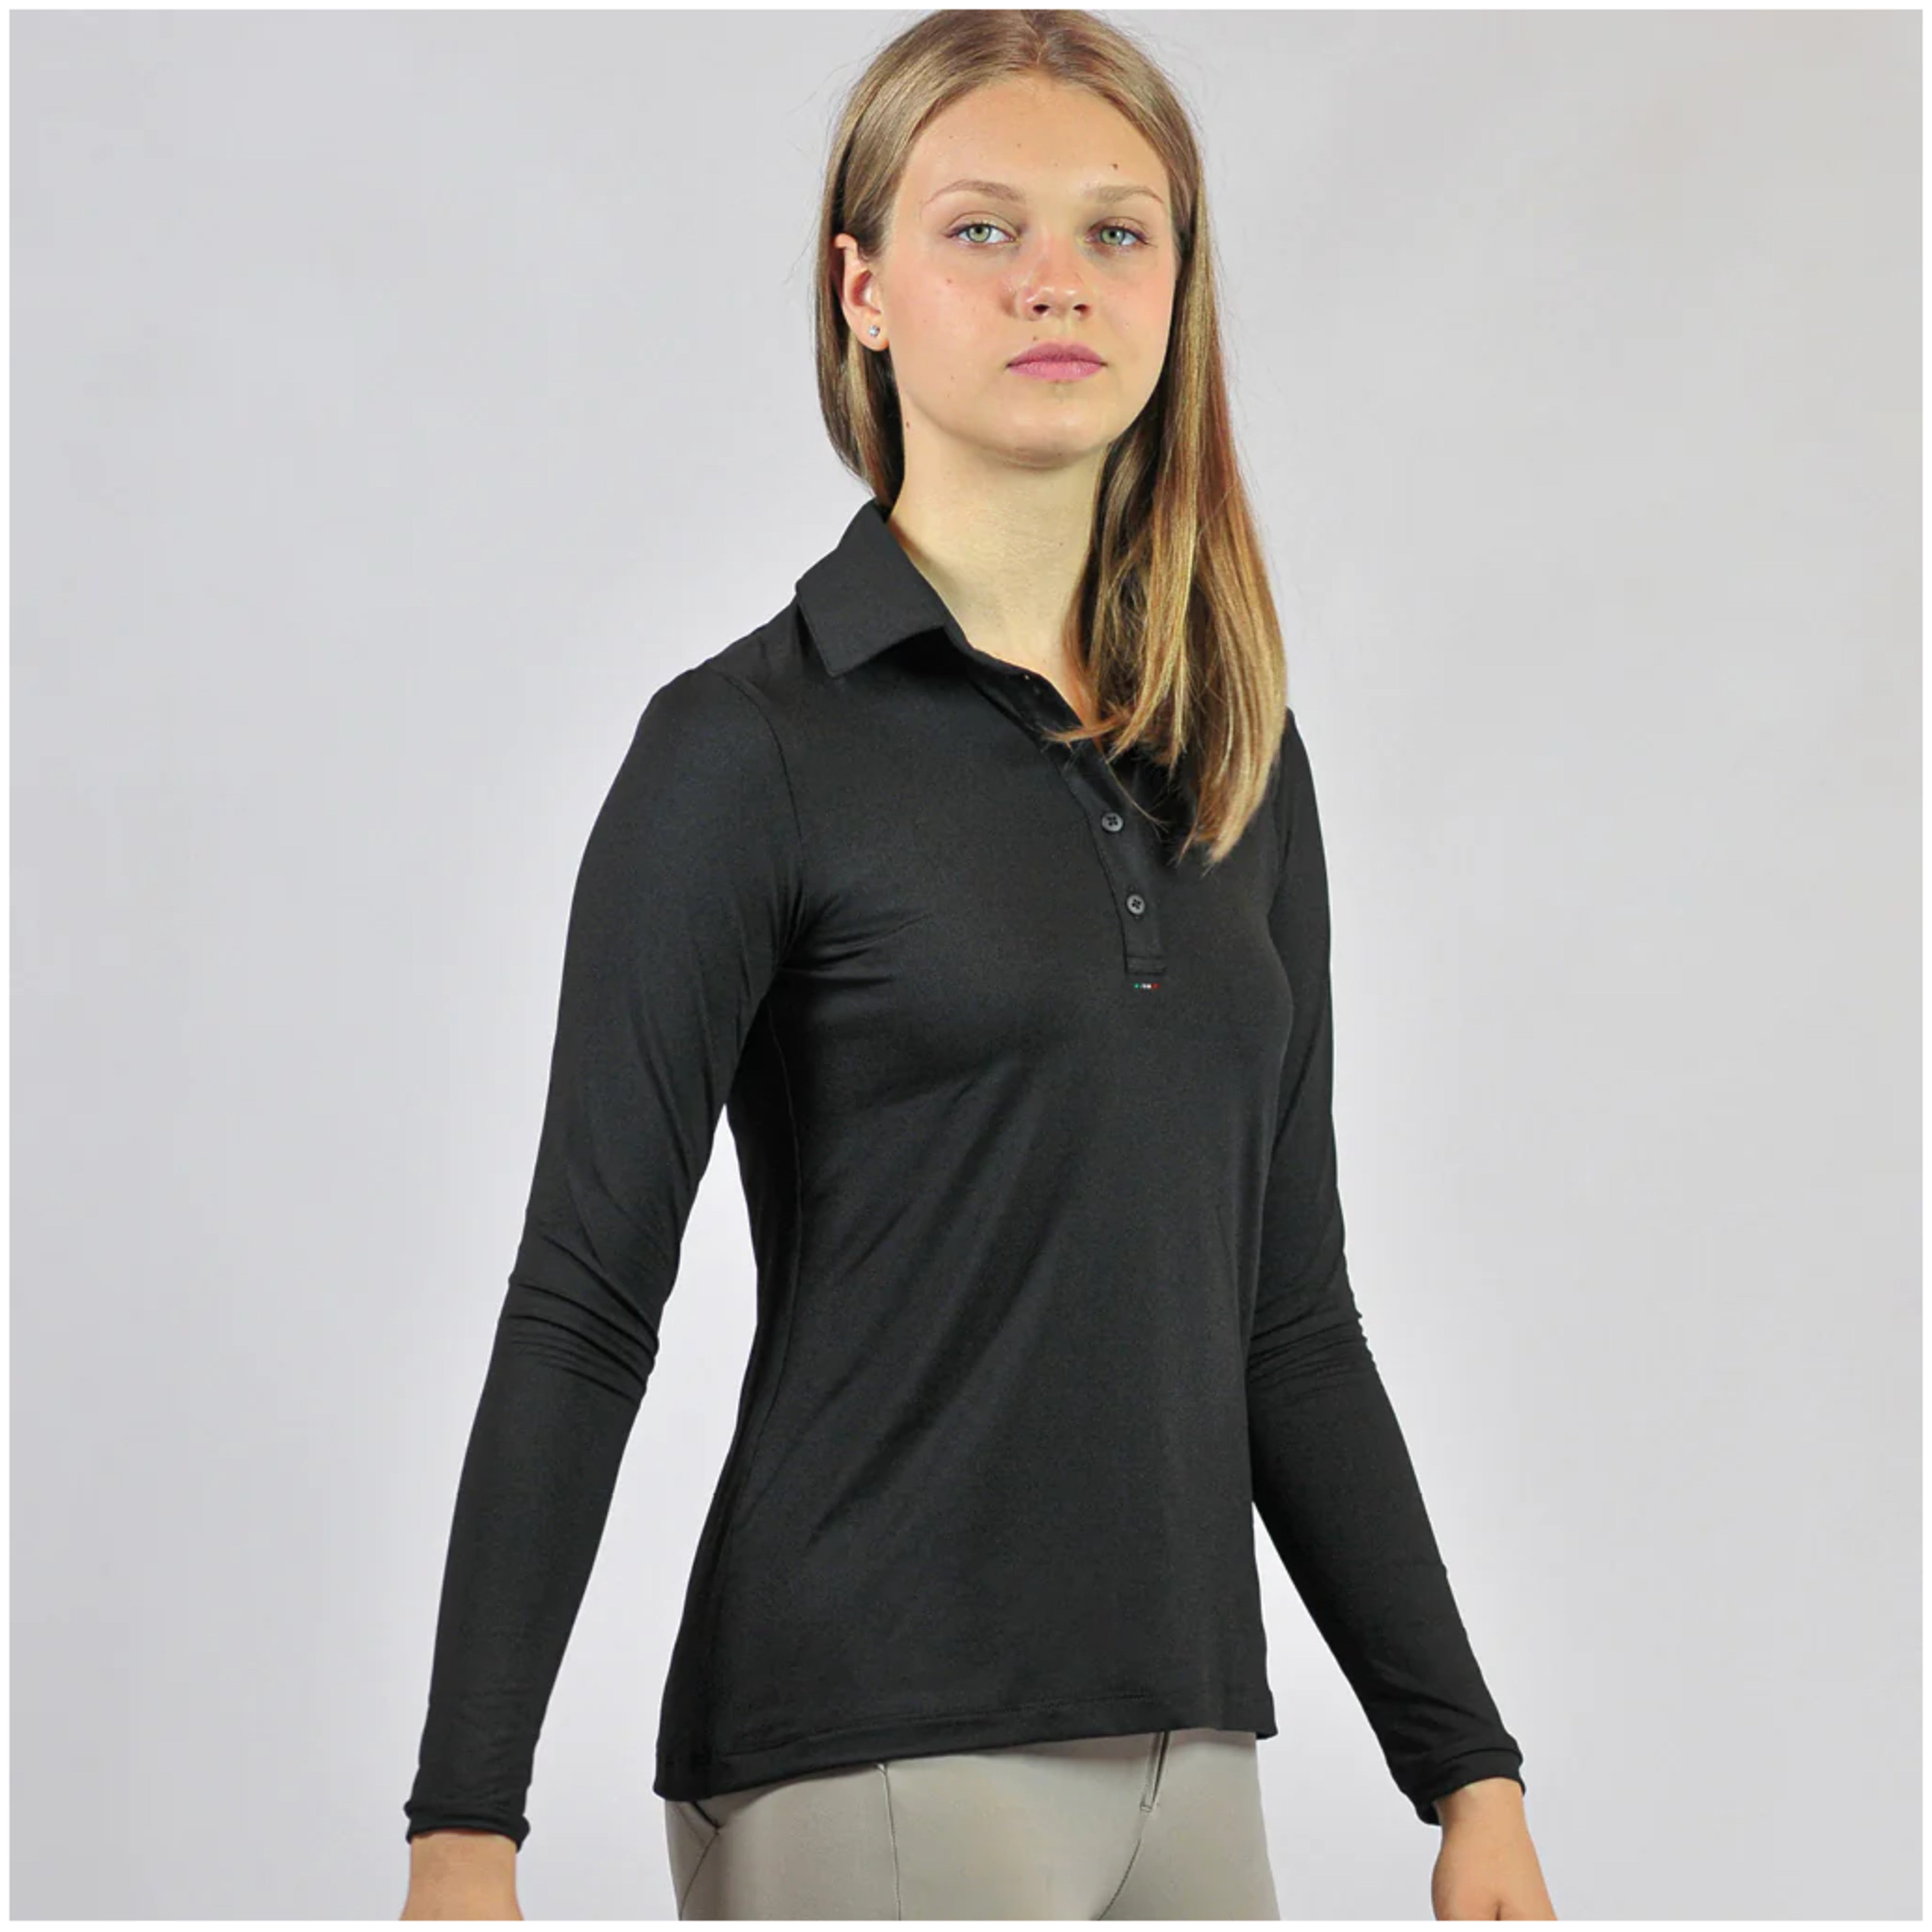 For Horses Cleo Polo l/s ladies